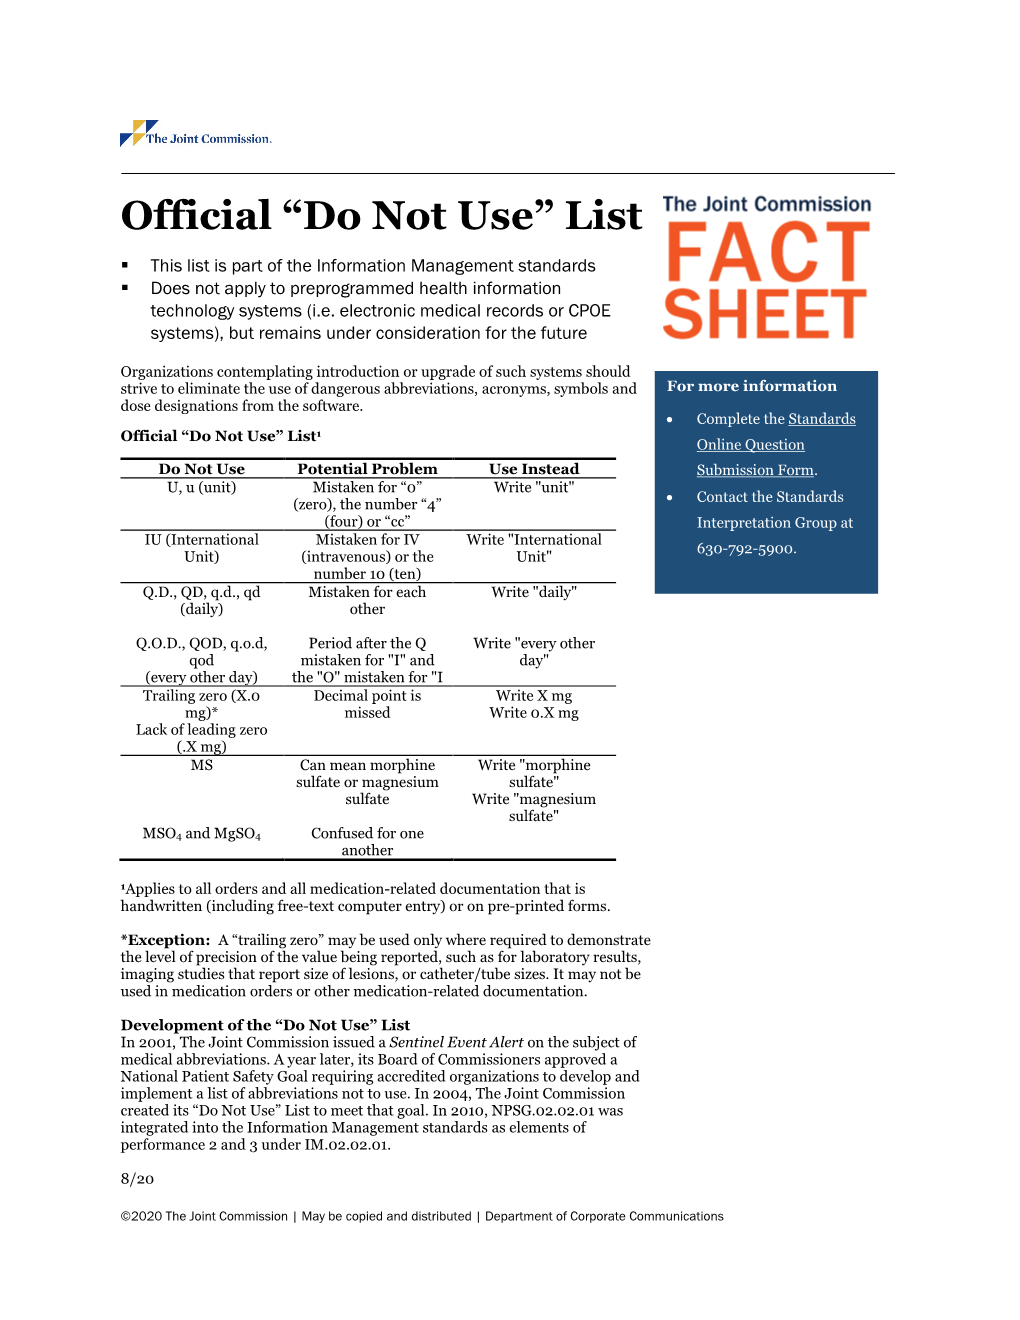 Official "Do Not Use" List of Abbreviations